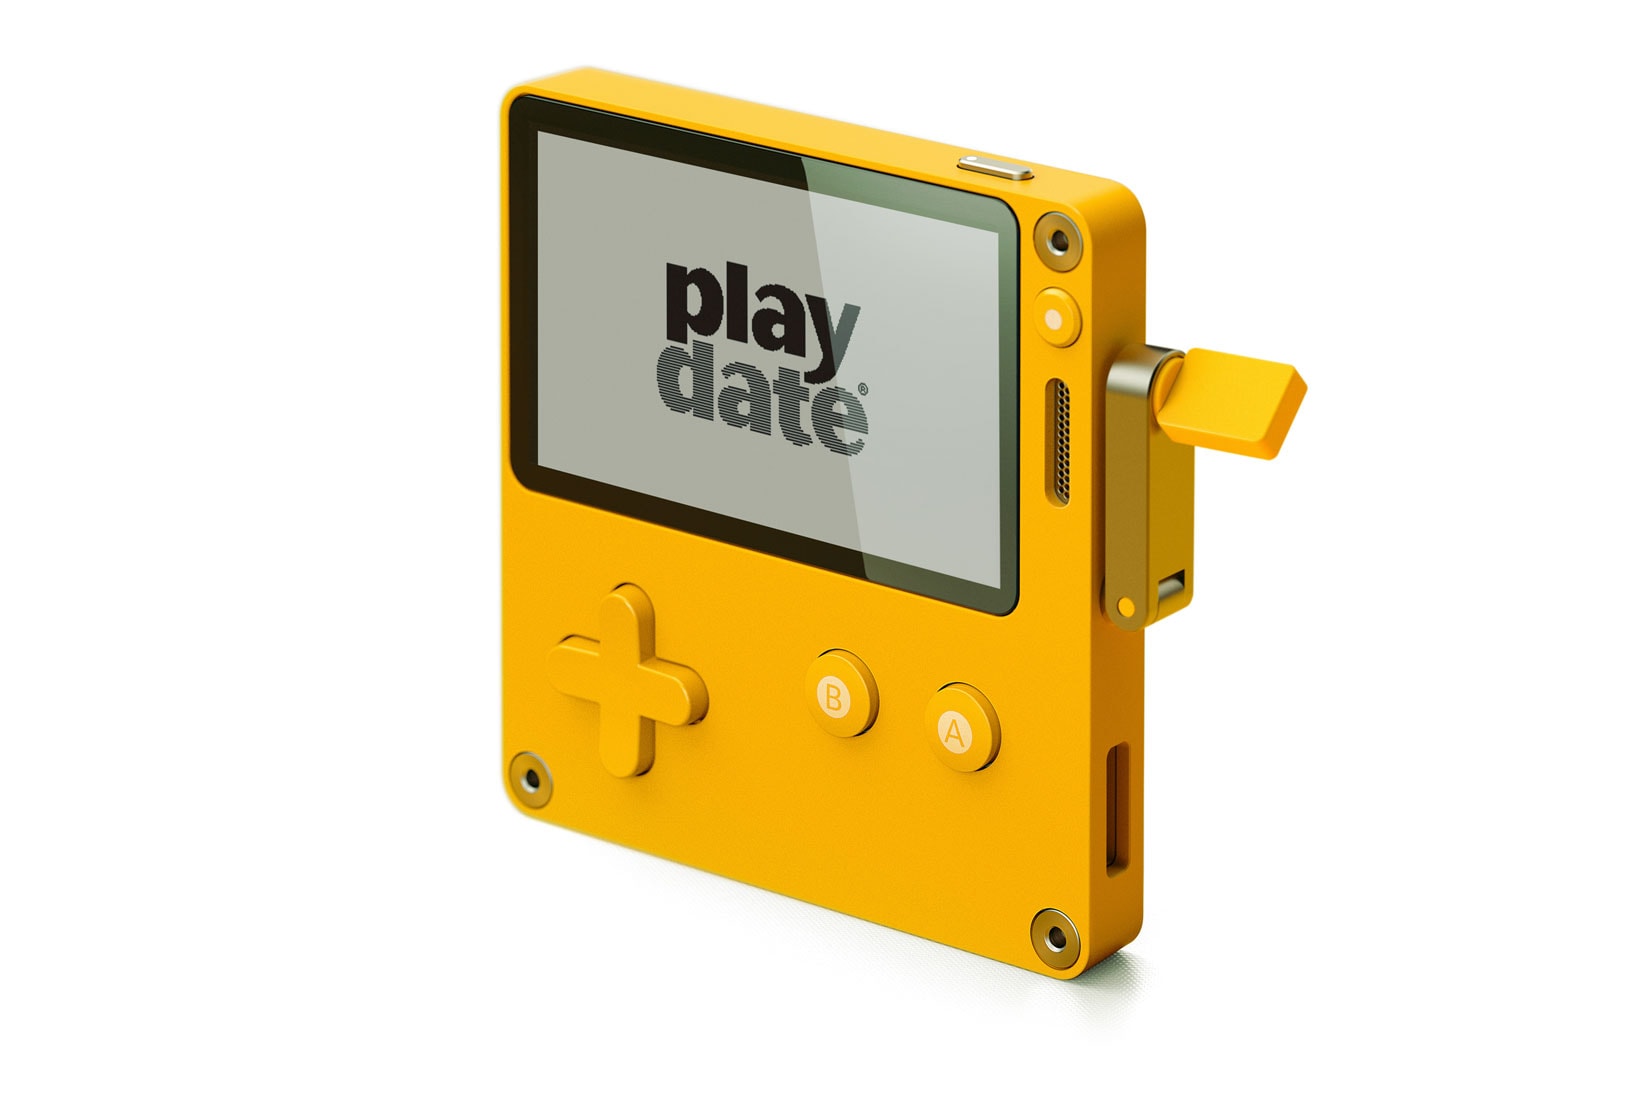 playdate gaming console retro yellow panic 2021 release date price